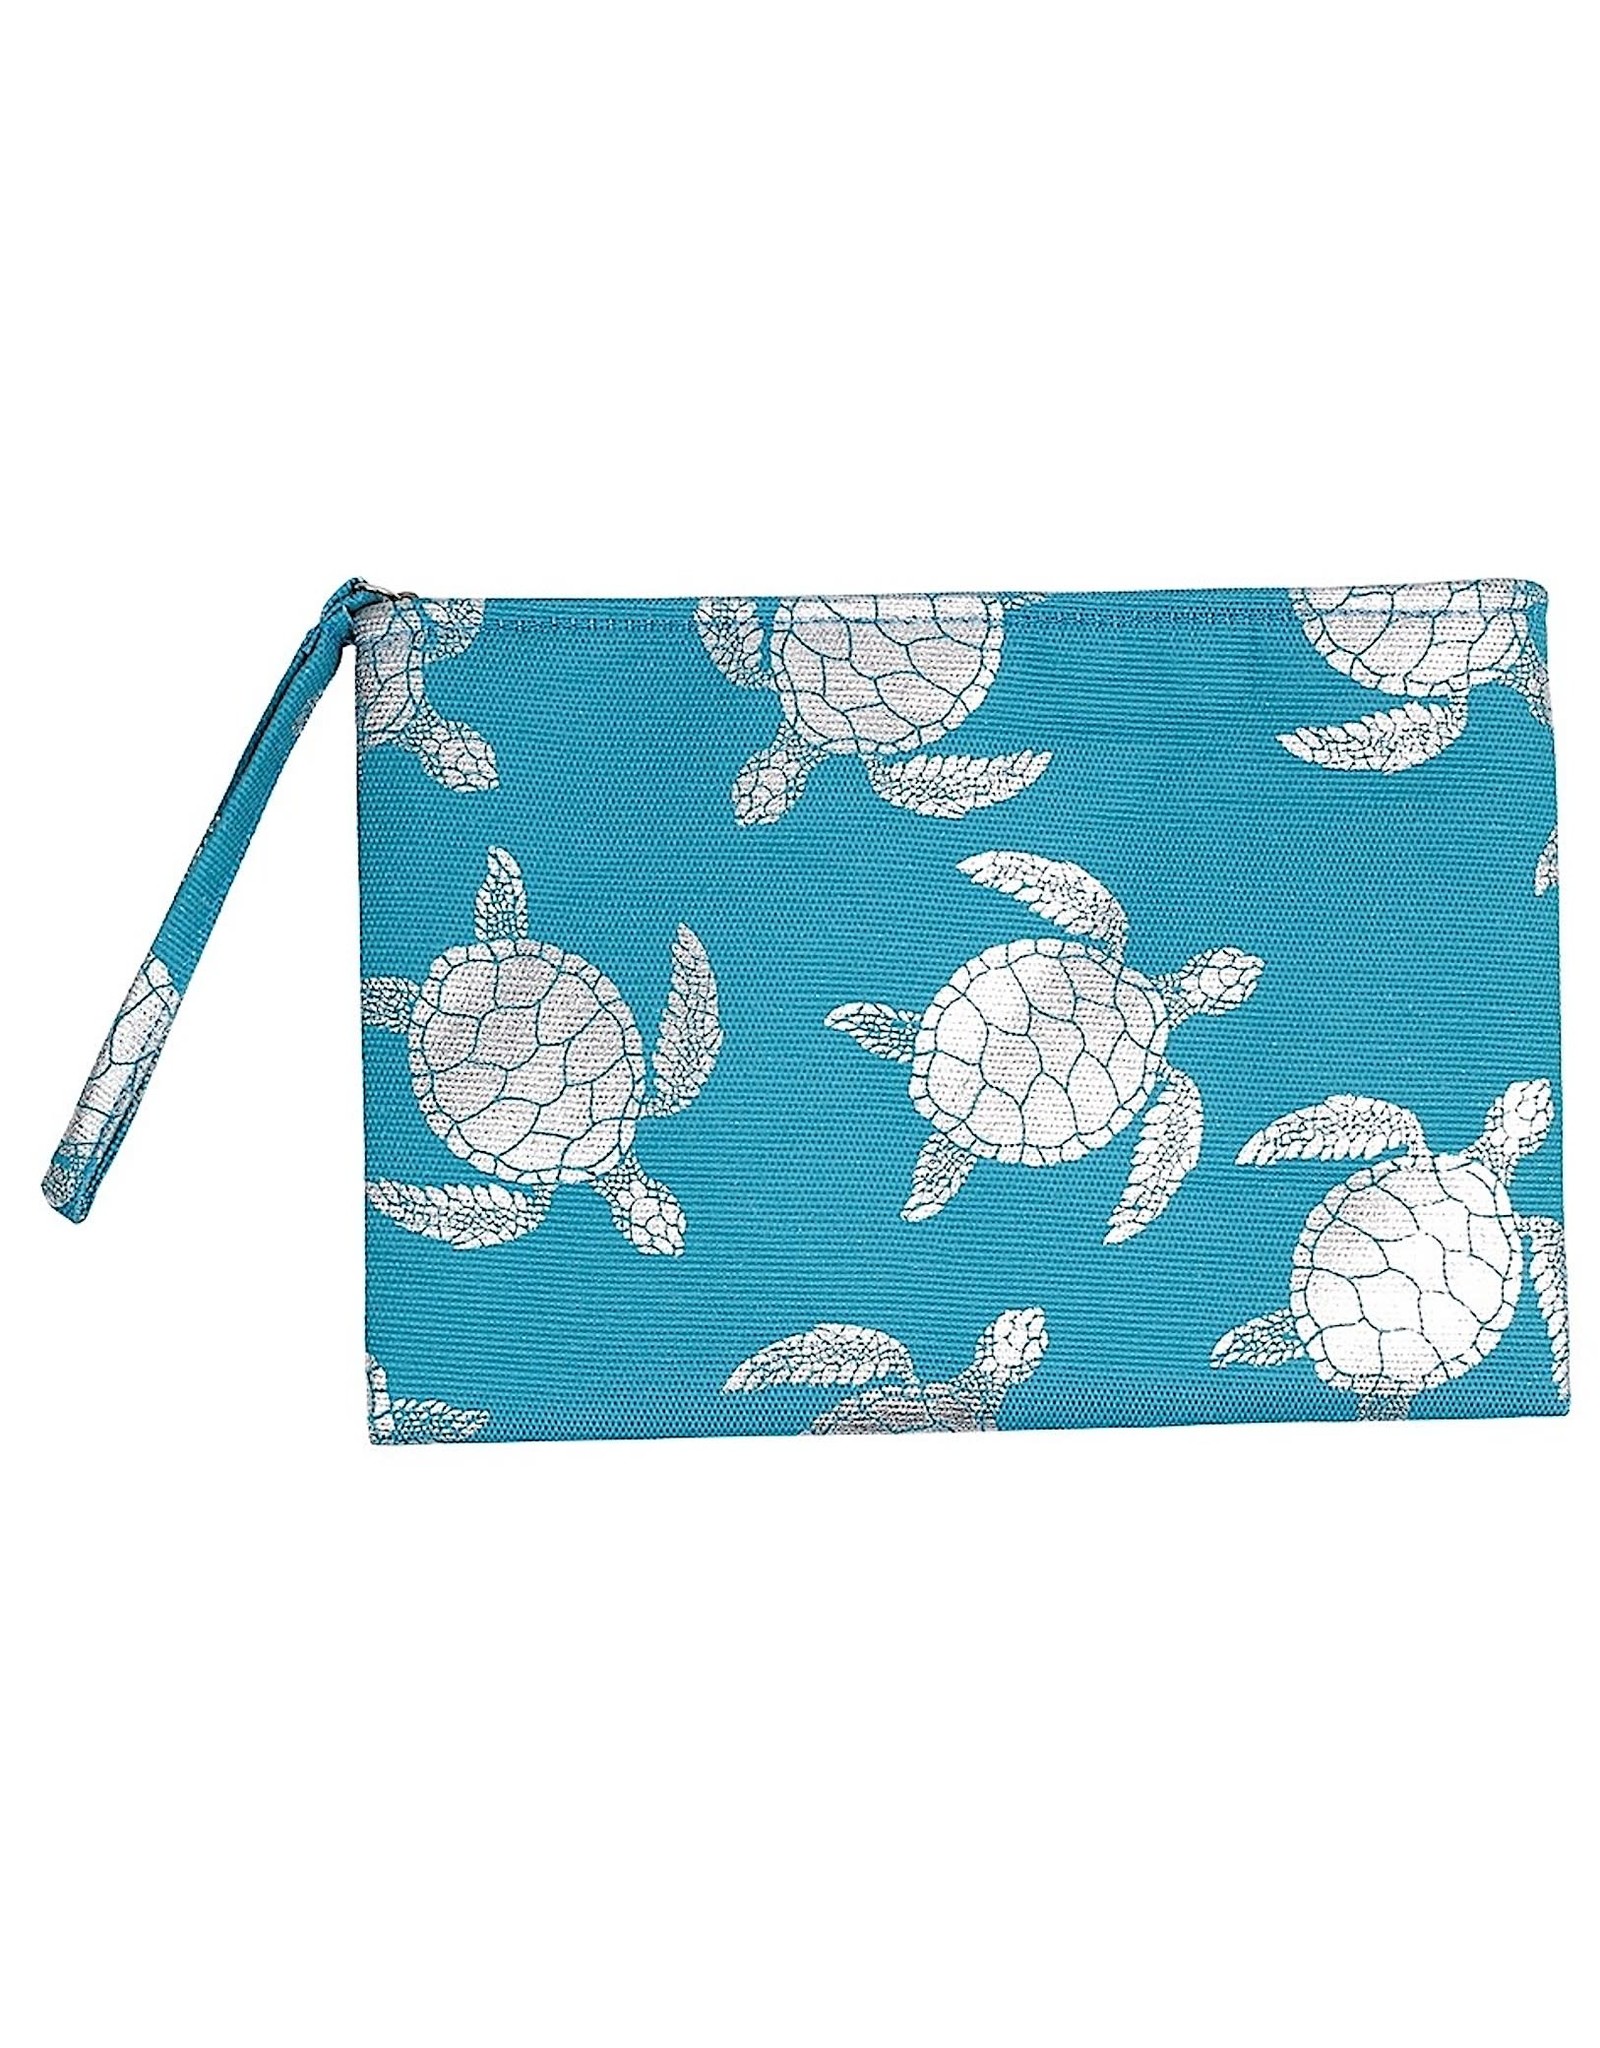 Periwinkle by Barlow Wristlets Turquoise With Silver Sea Turtles Wristlet